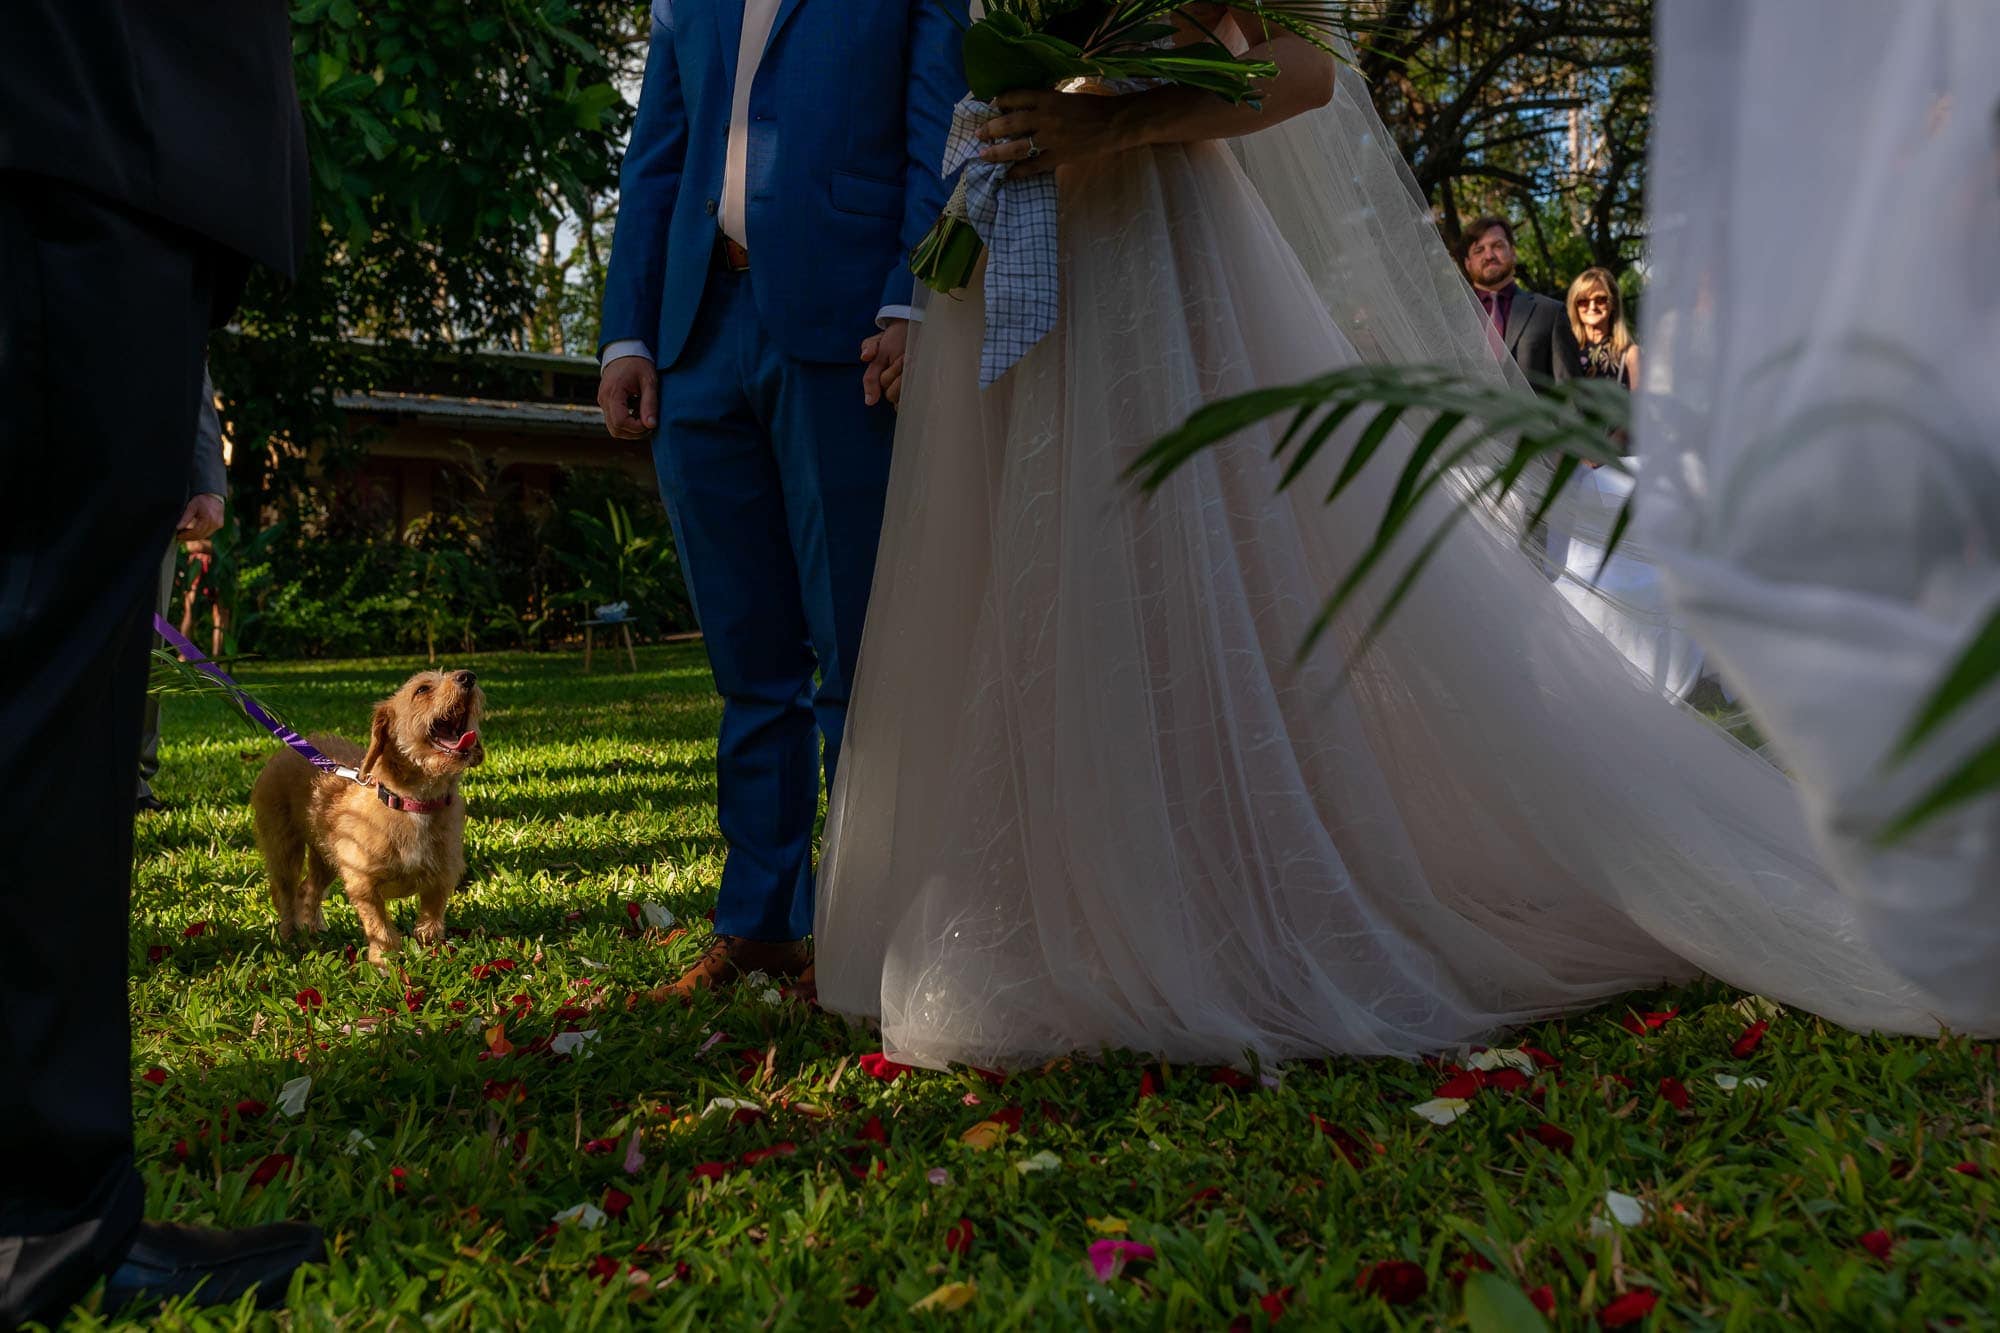 Closeup of the little doggy friend at the bride and groom's feet during the ceremony